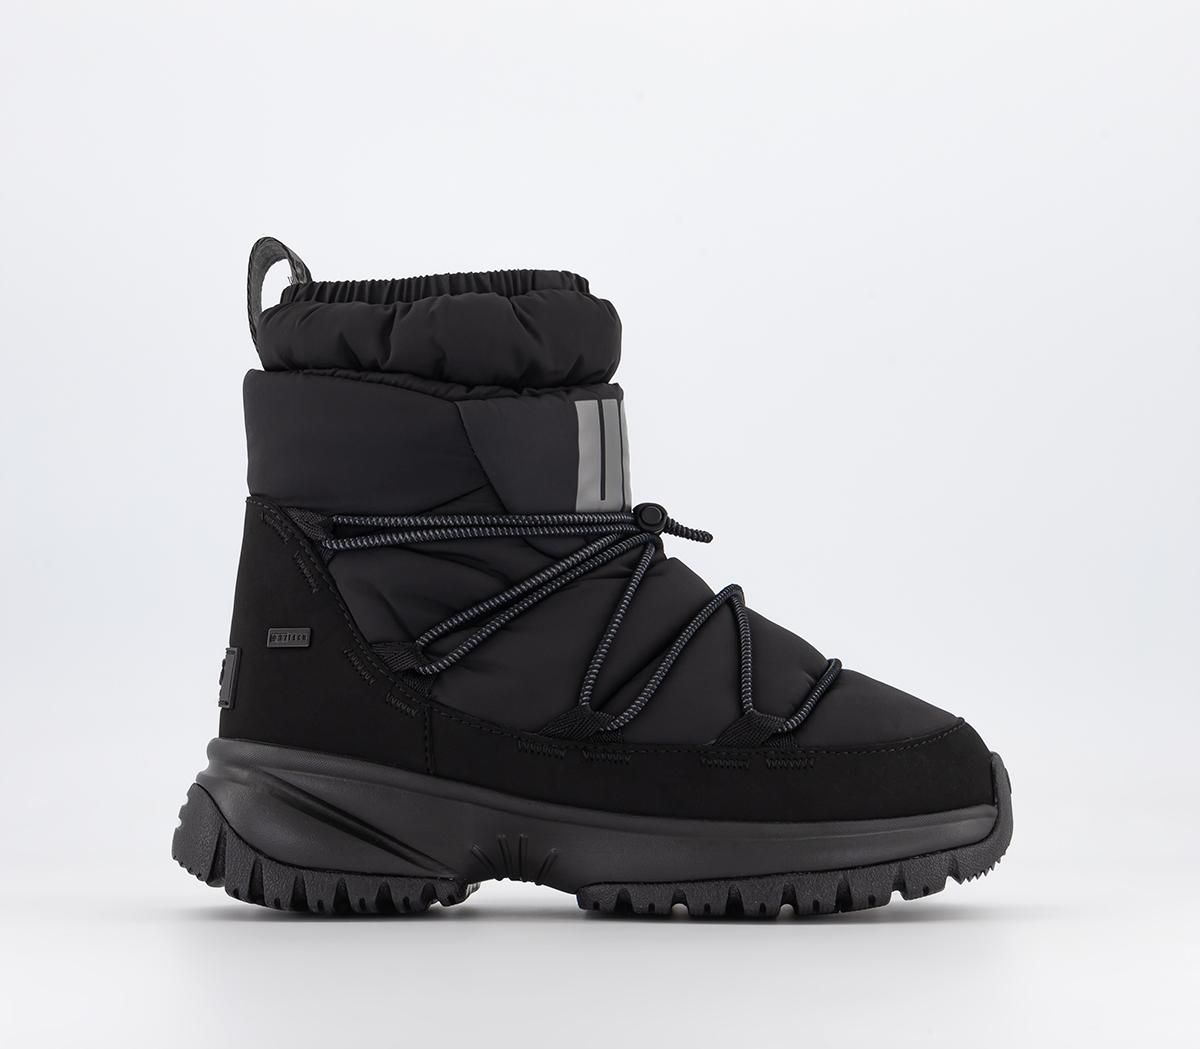 UGG Yose Puff Mid Boots Black - Women's Ankle Boots